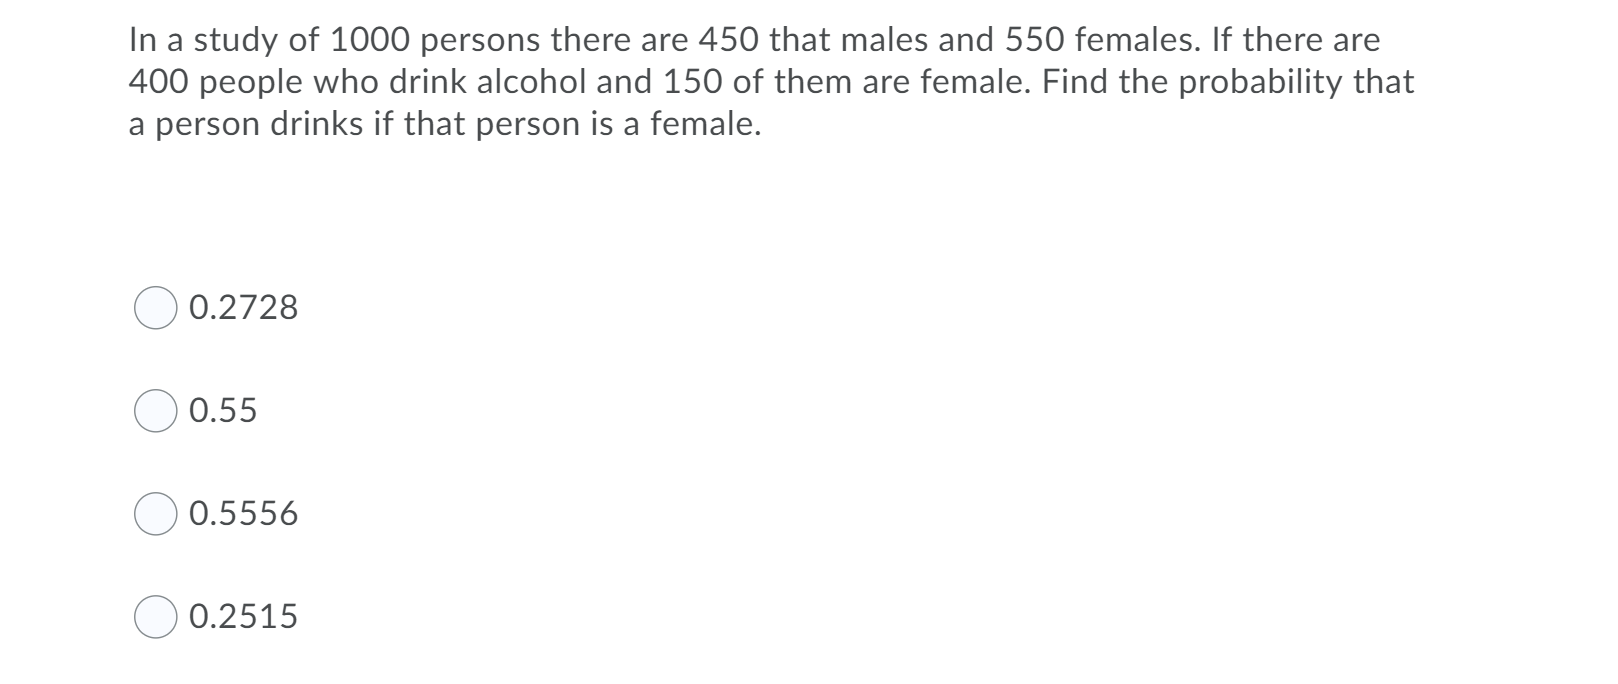 In a study of 1000 persons there are 450 that males and 550 females. If there are
400 people who drink alcohol and 150 of them are female. Find the probability that
a person drinks if that person is a female.
